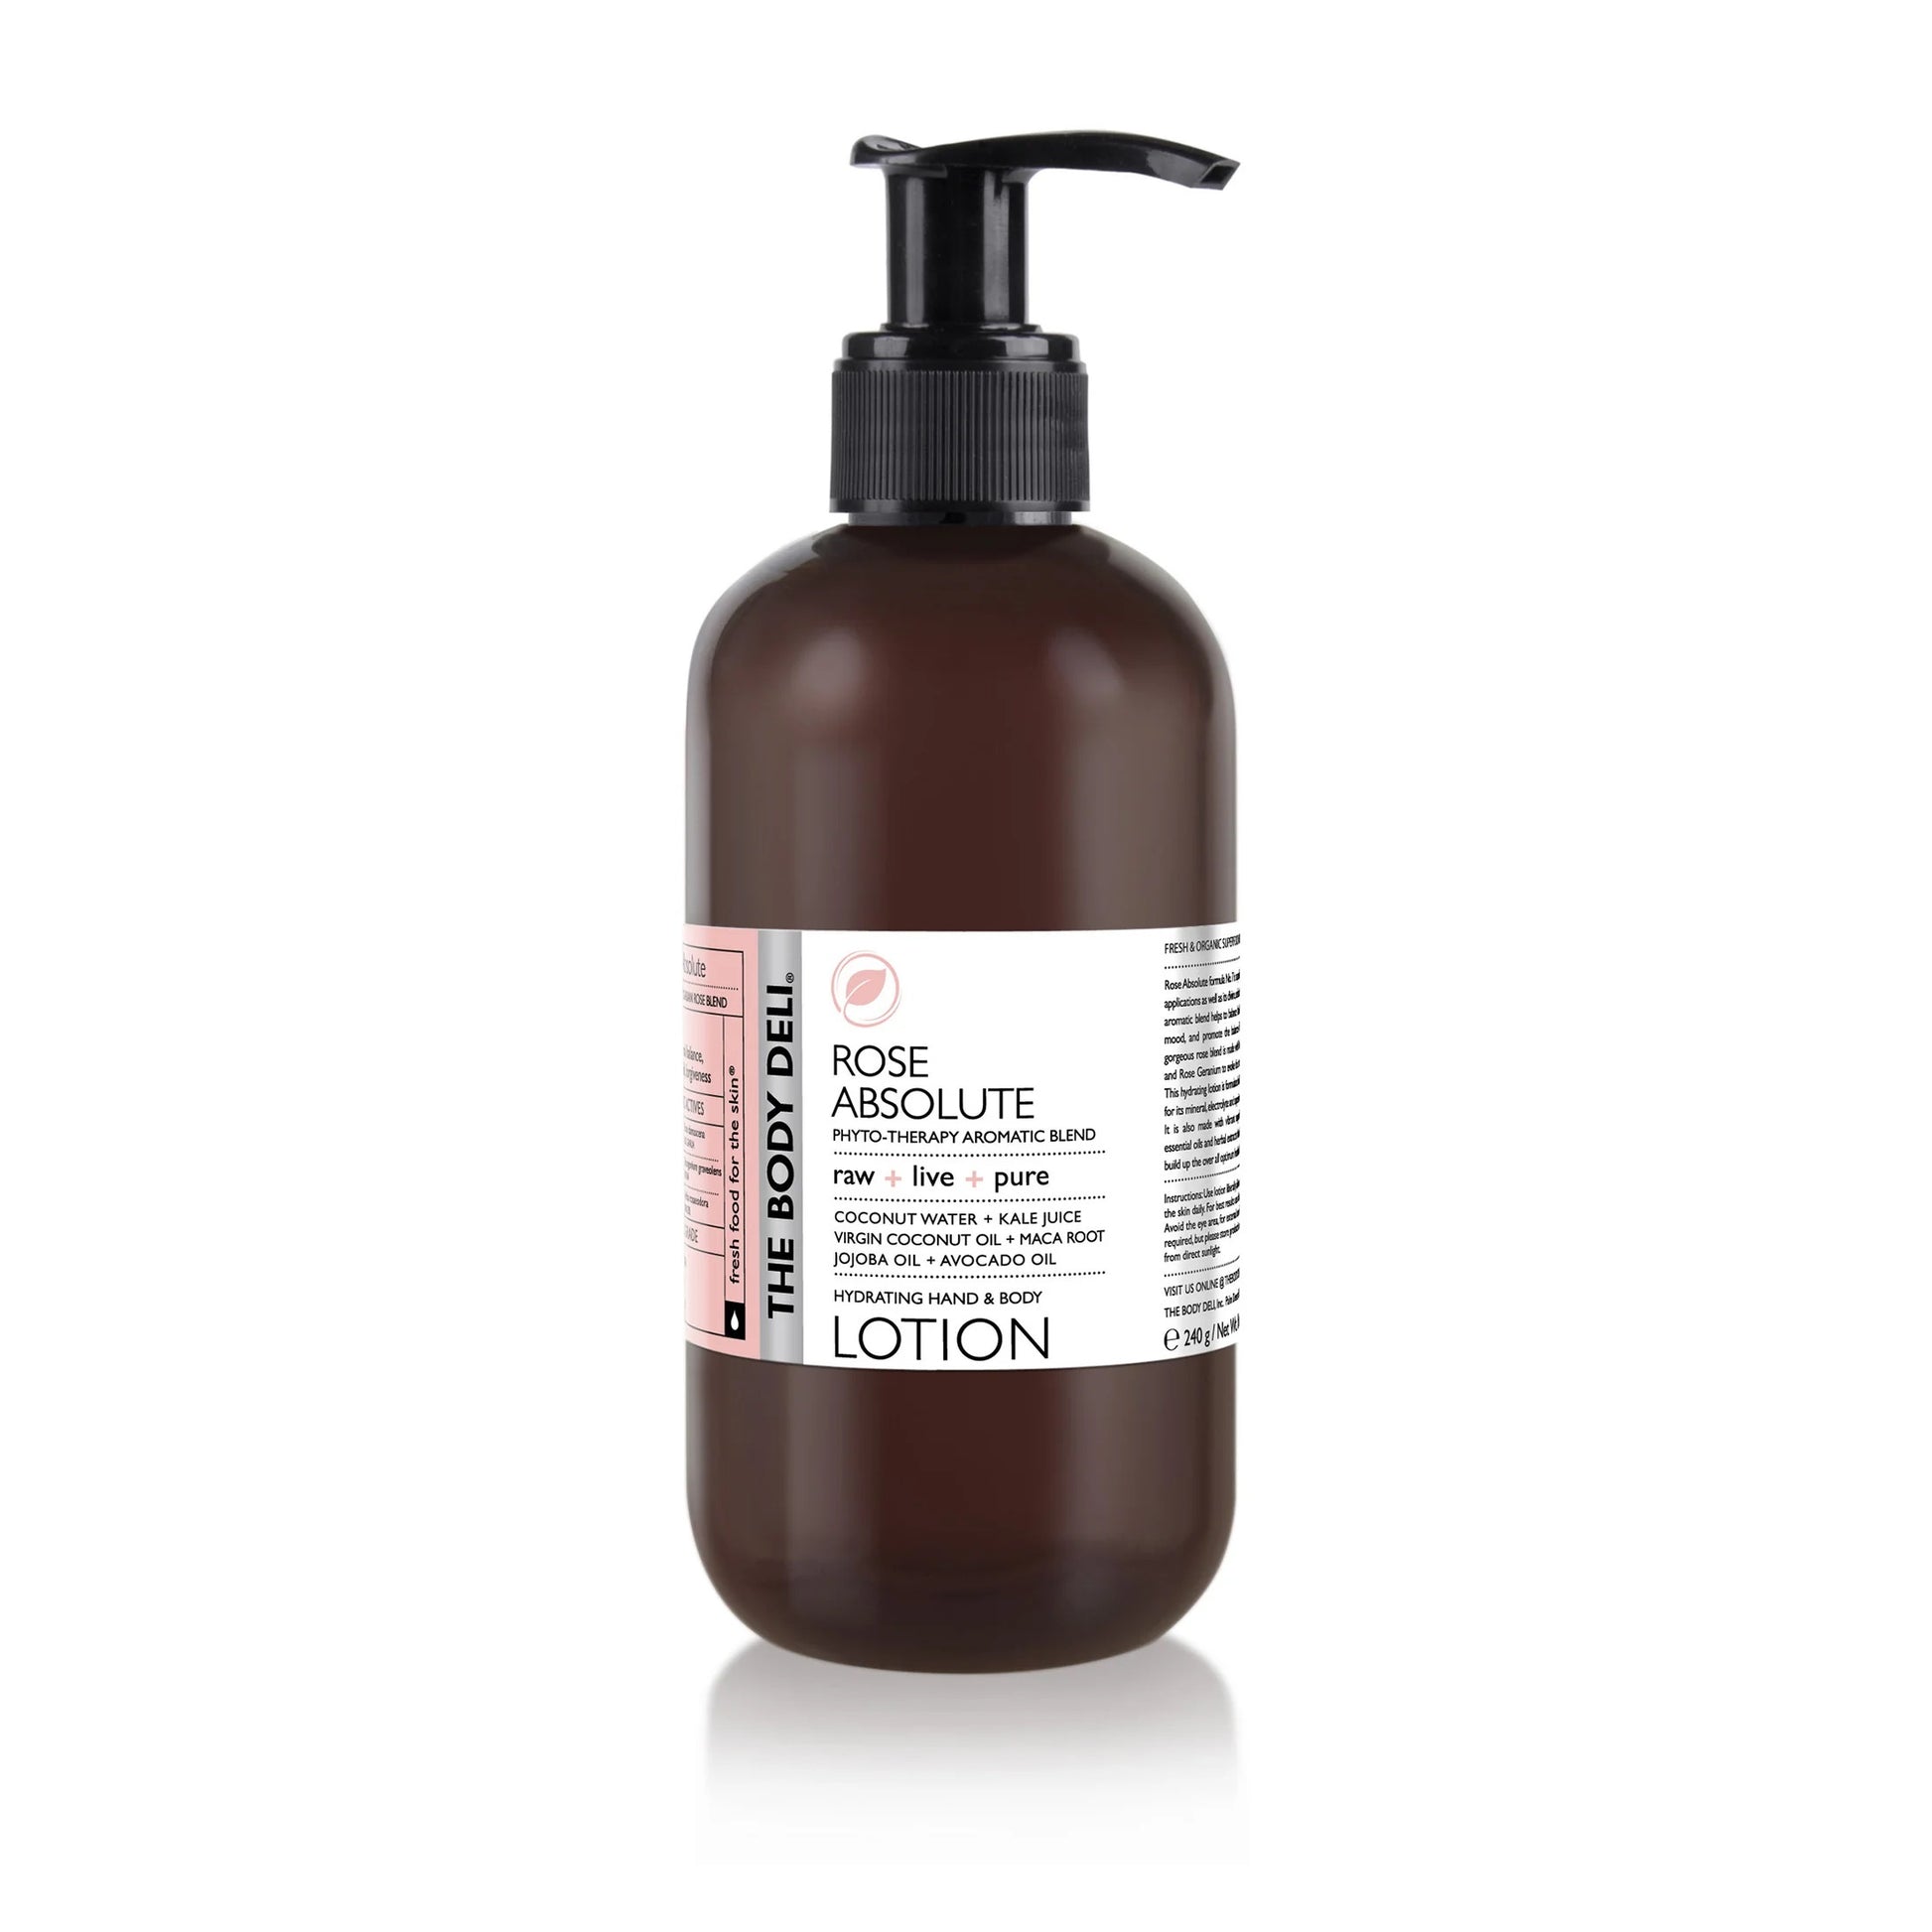 THE BODY DELI ROSE ABSOLUTE Hand & Body Lotion